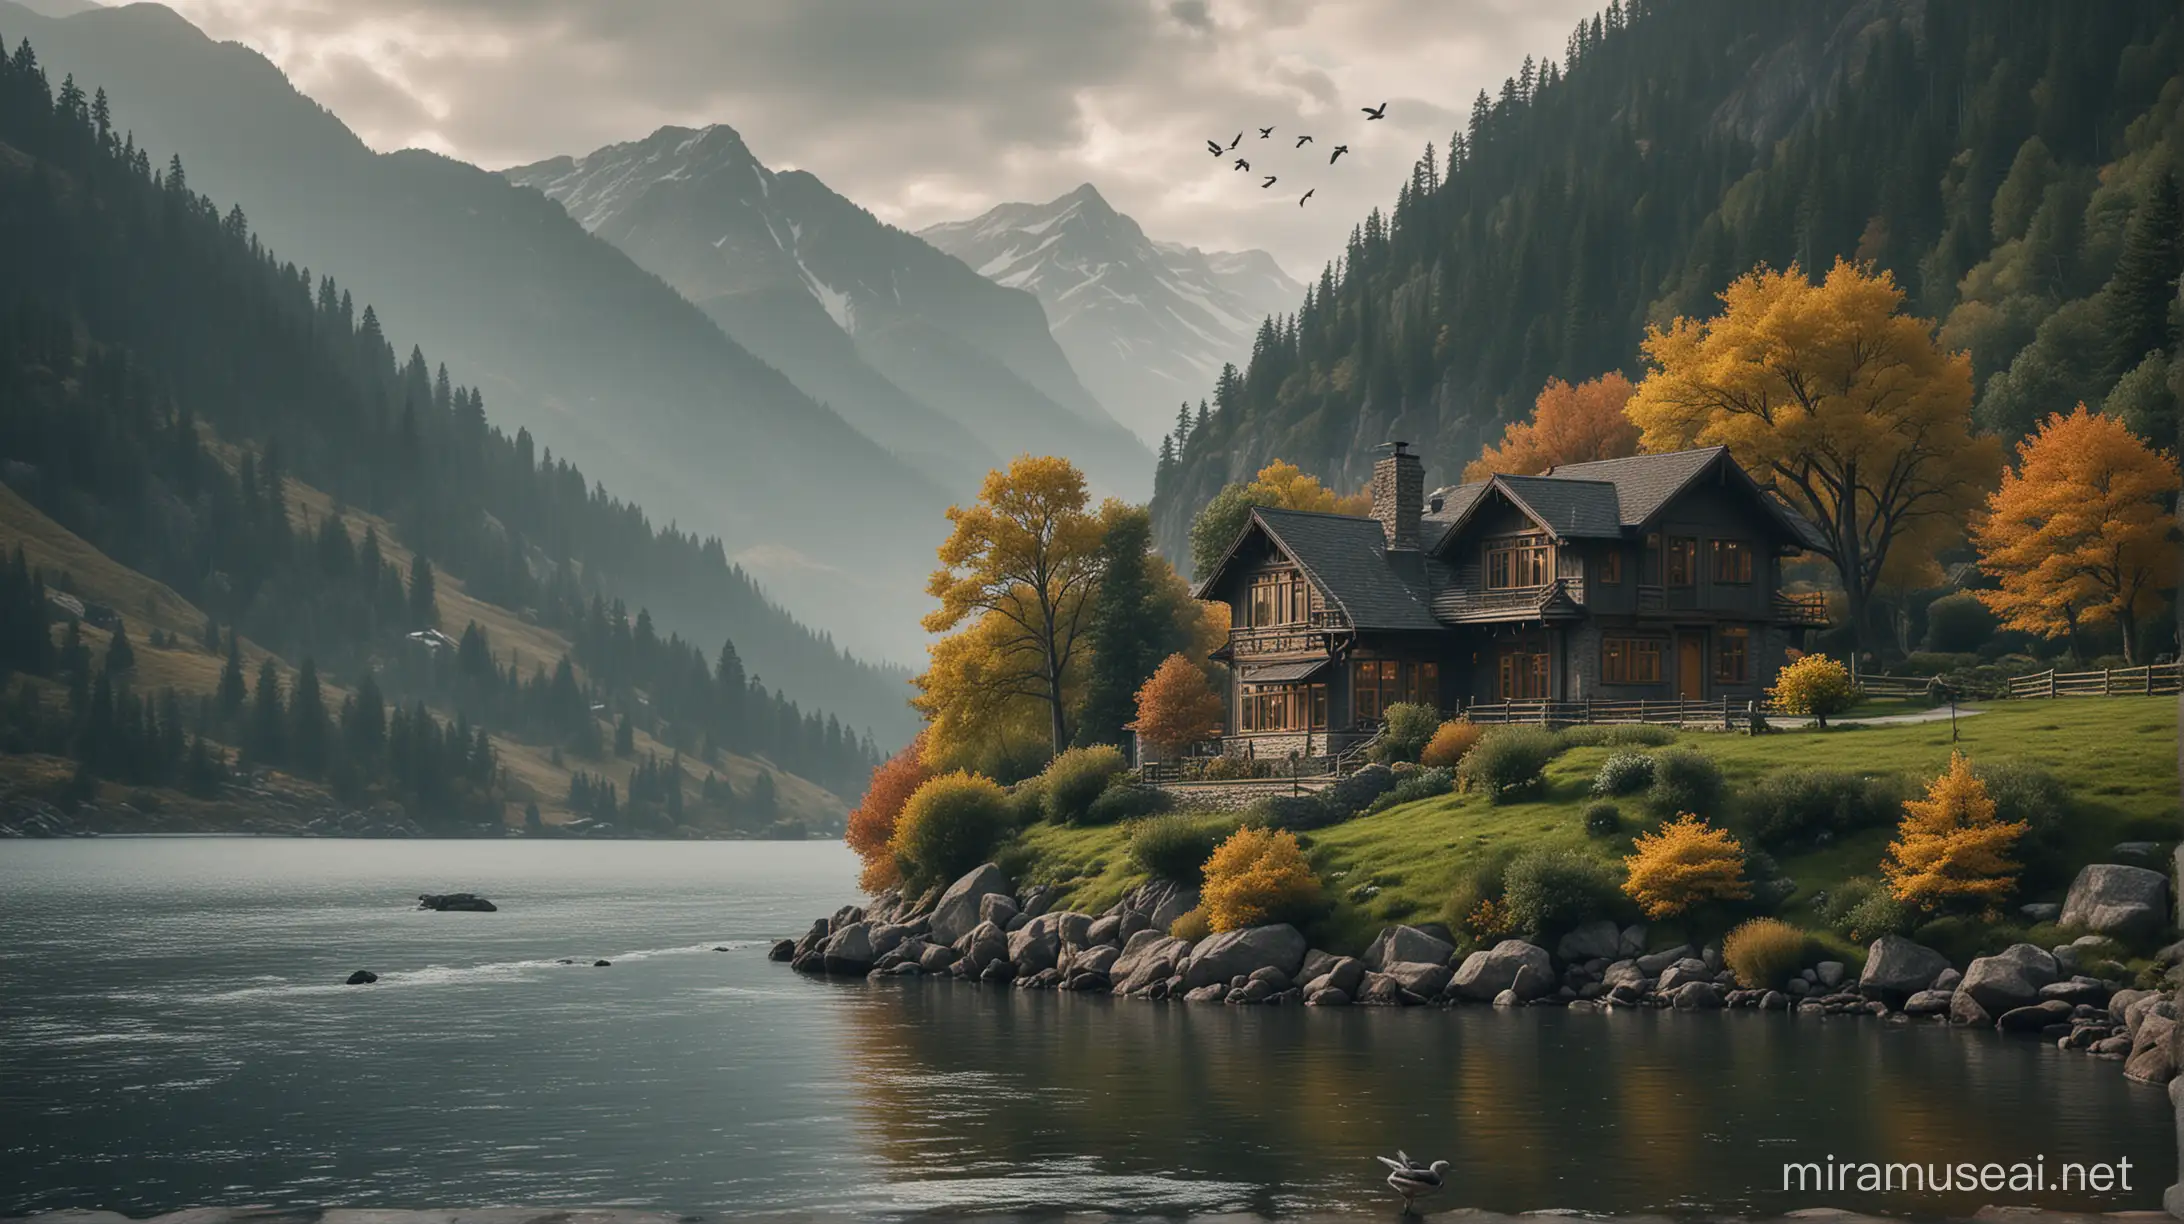 Tranquil Mountain Landscape with Reflective Waters and Charming House